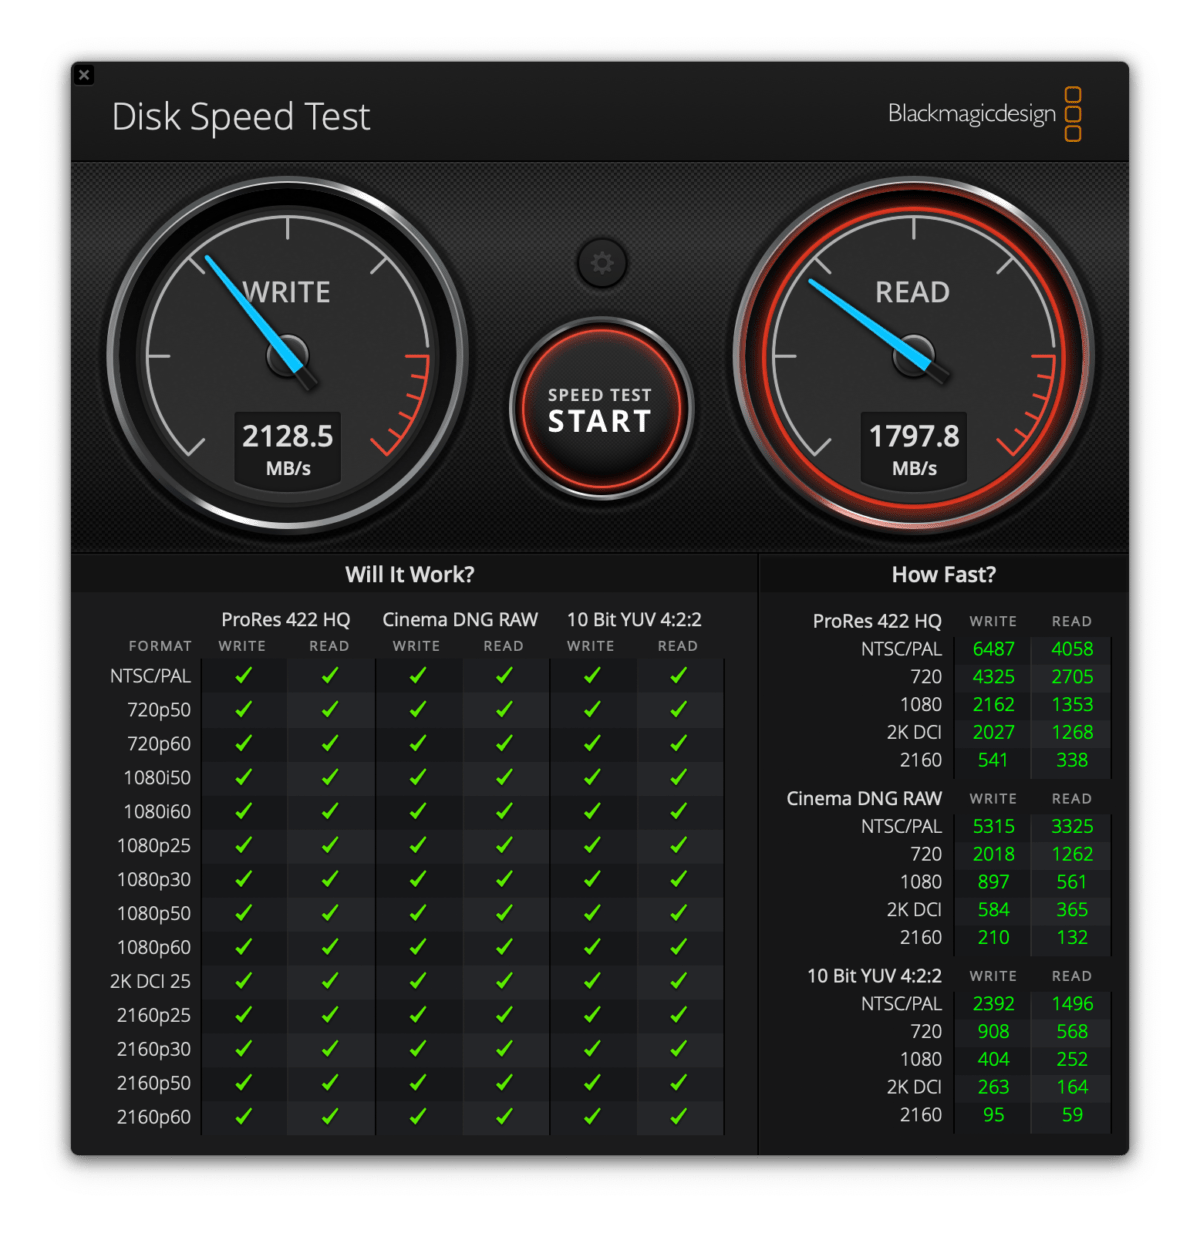 Results on a MacBook Pro M1